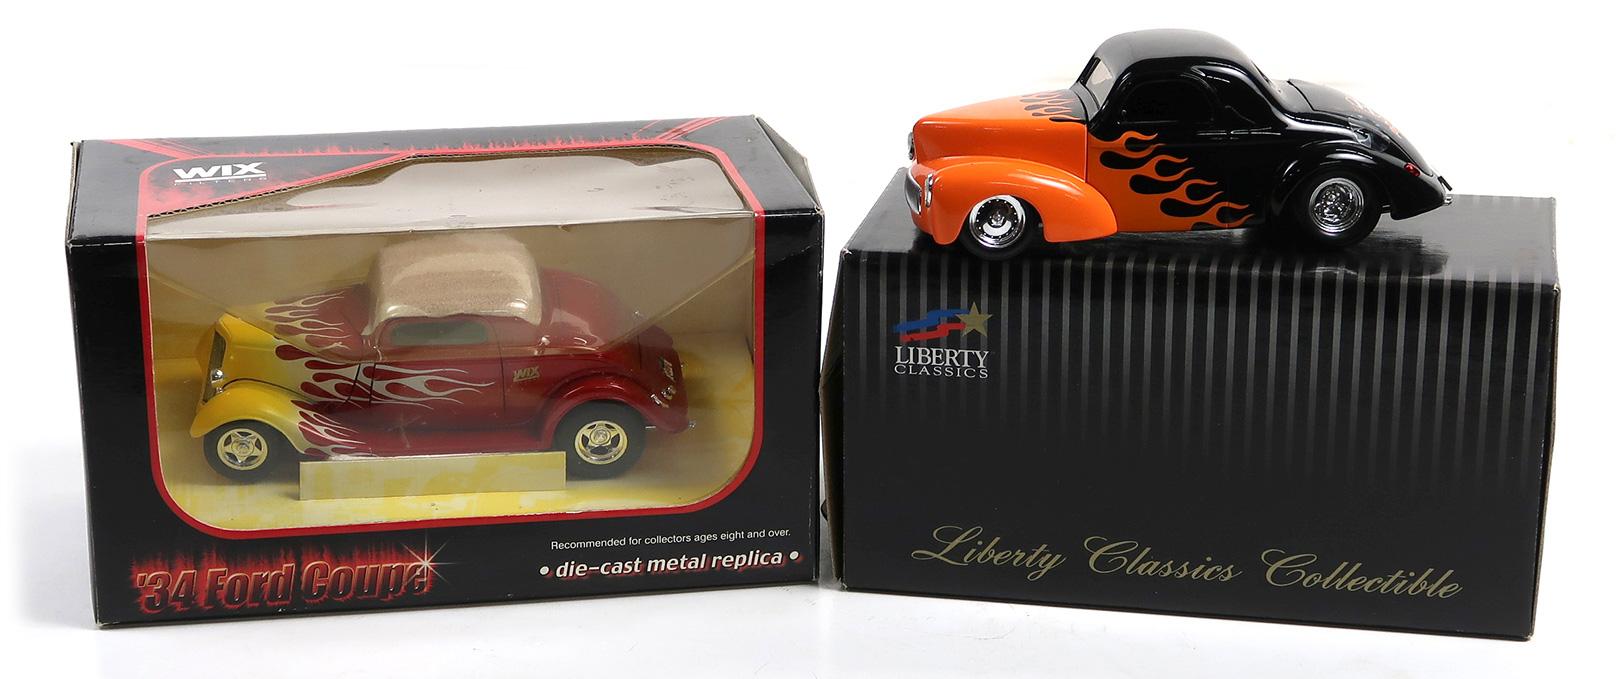 Toy Scale Models (2), Liberty Classics 1941 Willys & WIX Filters 1934 Ford